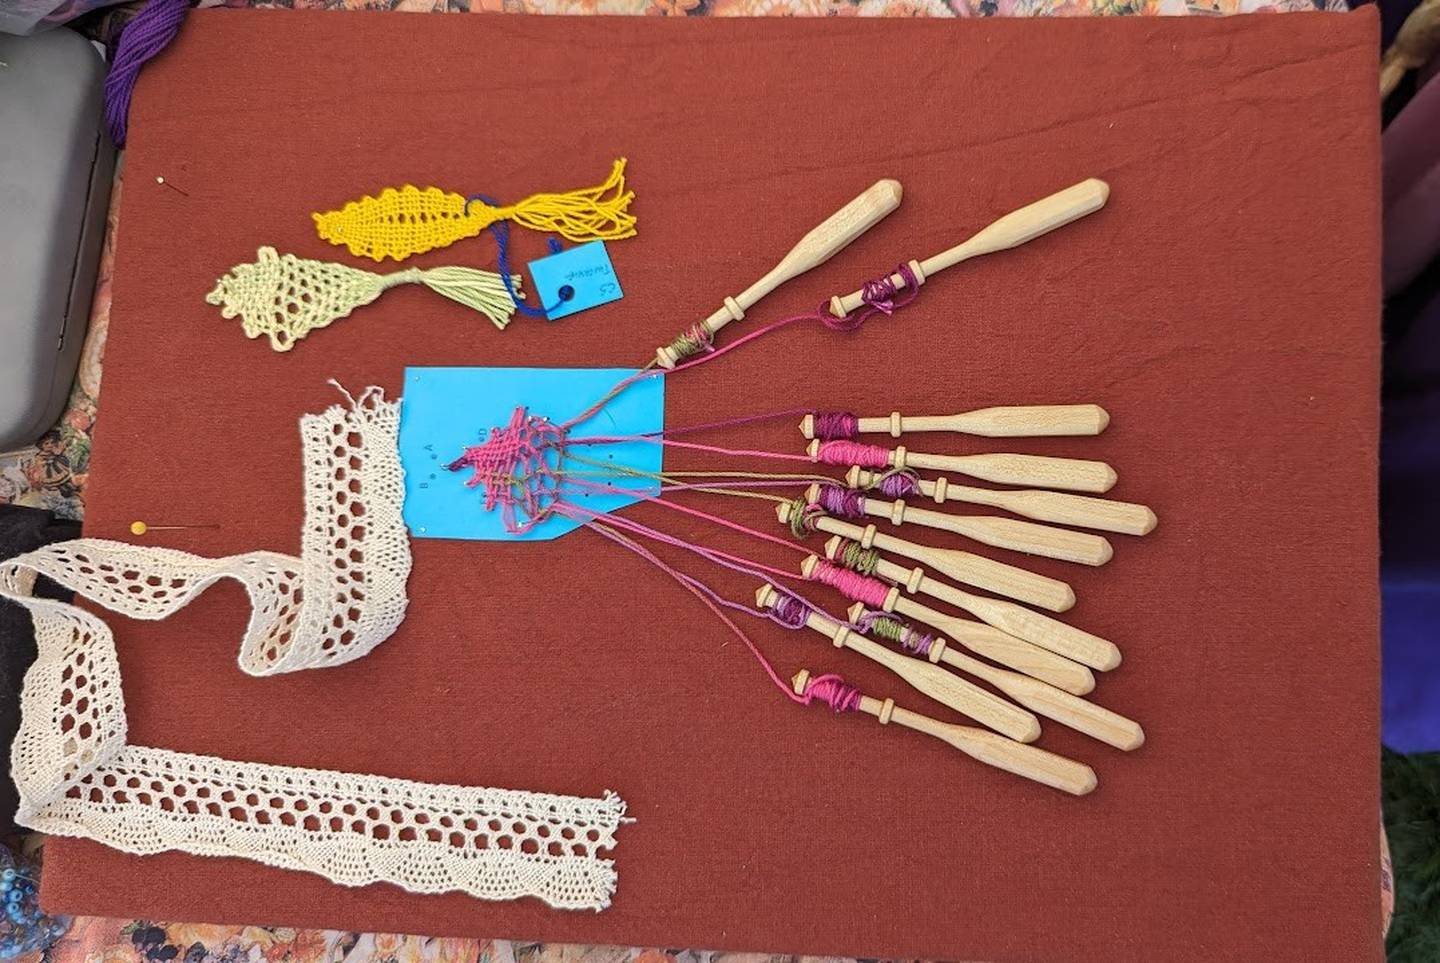 Janet Erio and her husband Steve Erio of Joliet showed attendees how to make bobbin lace, which originated in the 15th century. Attendees could make a fish or kite to take home with them.